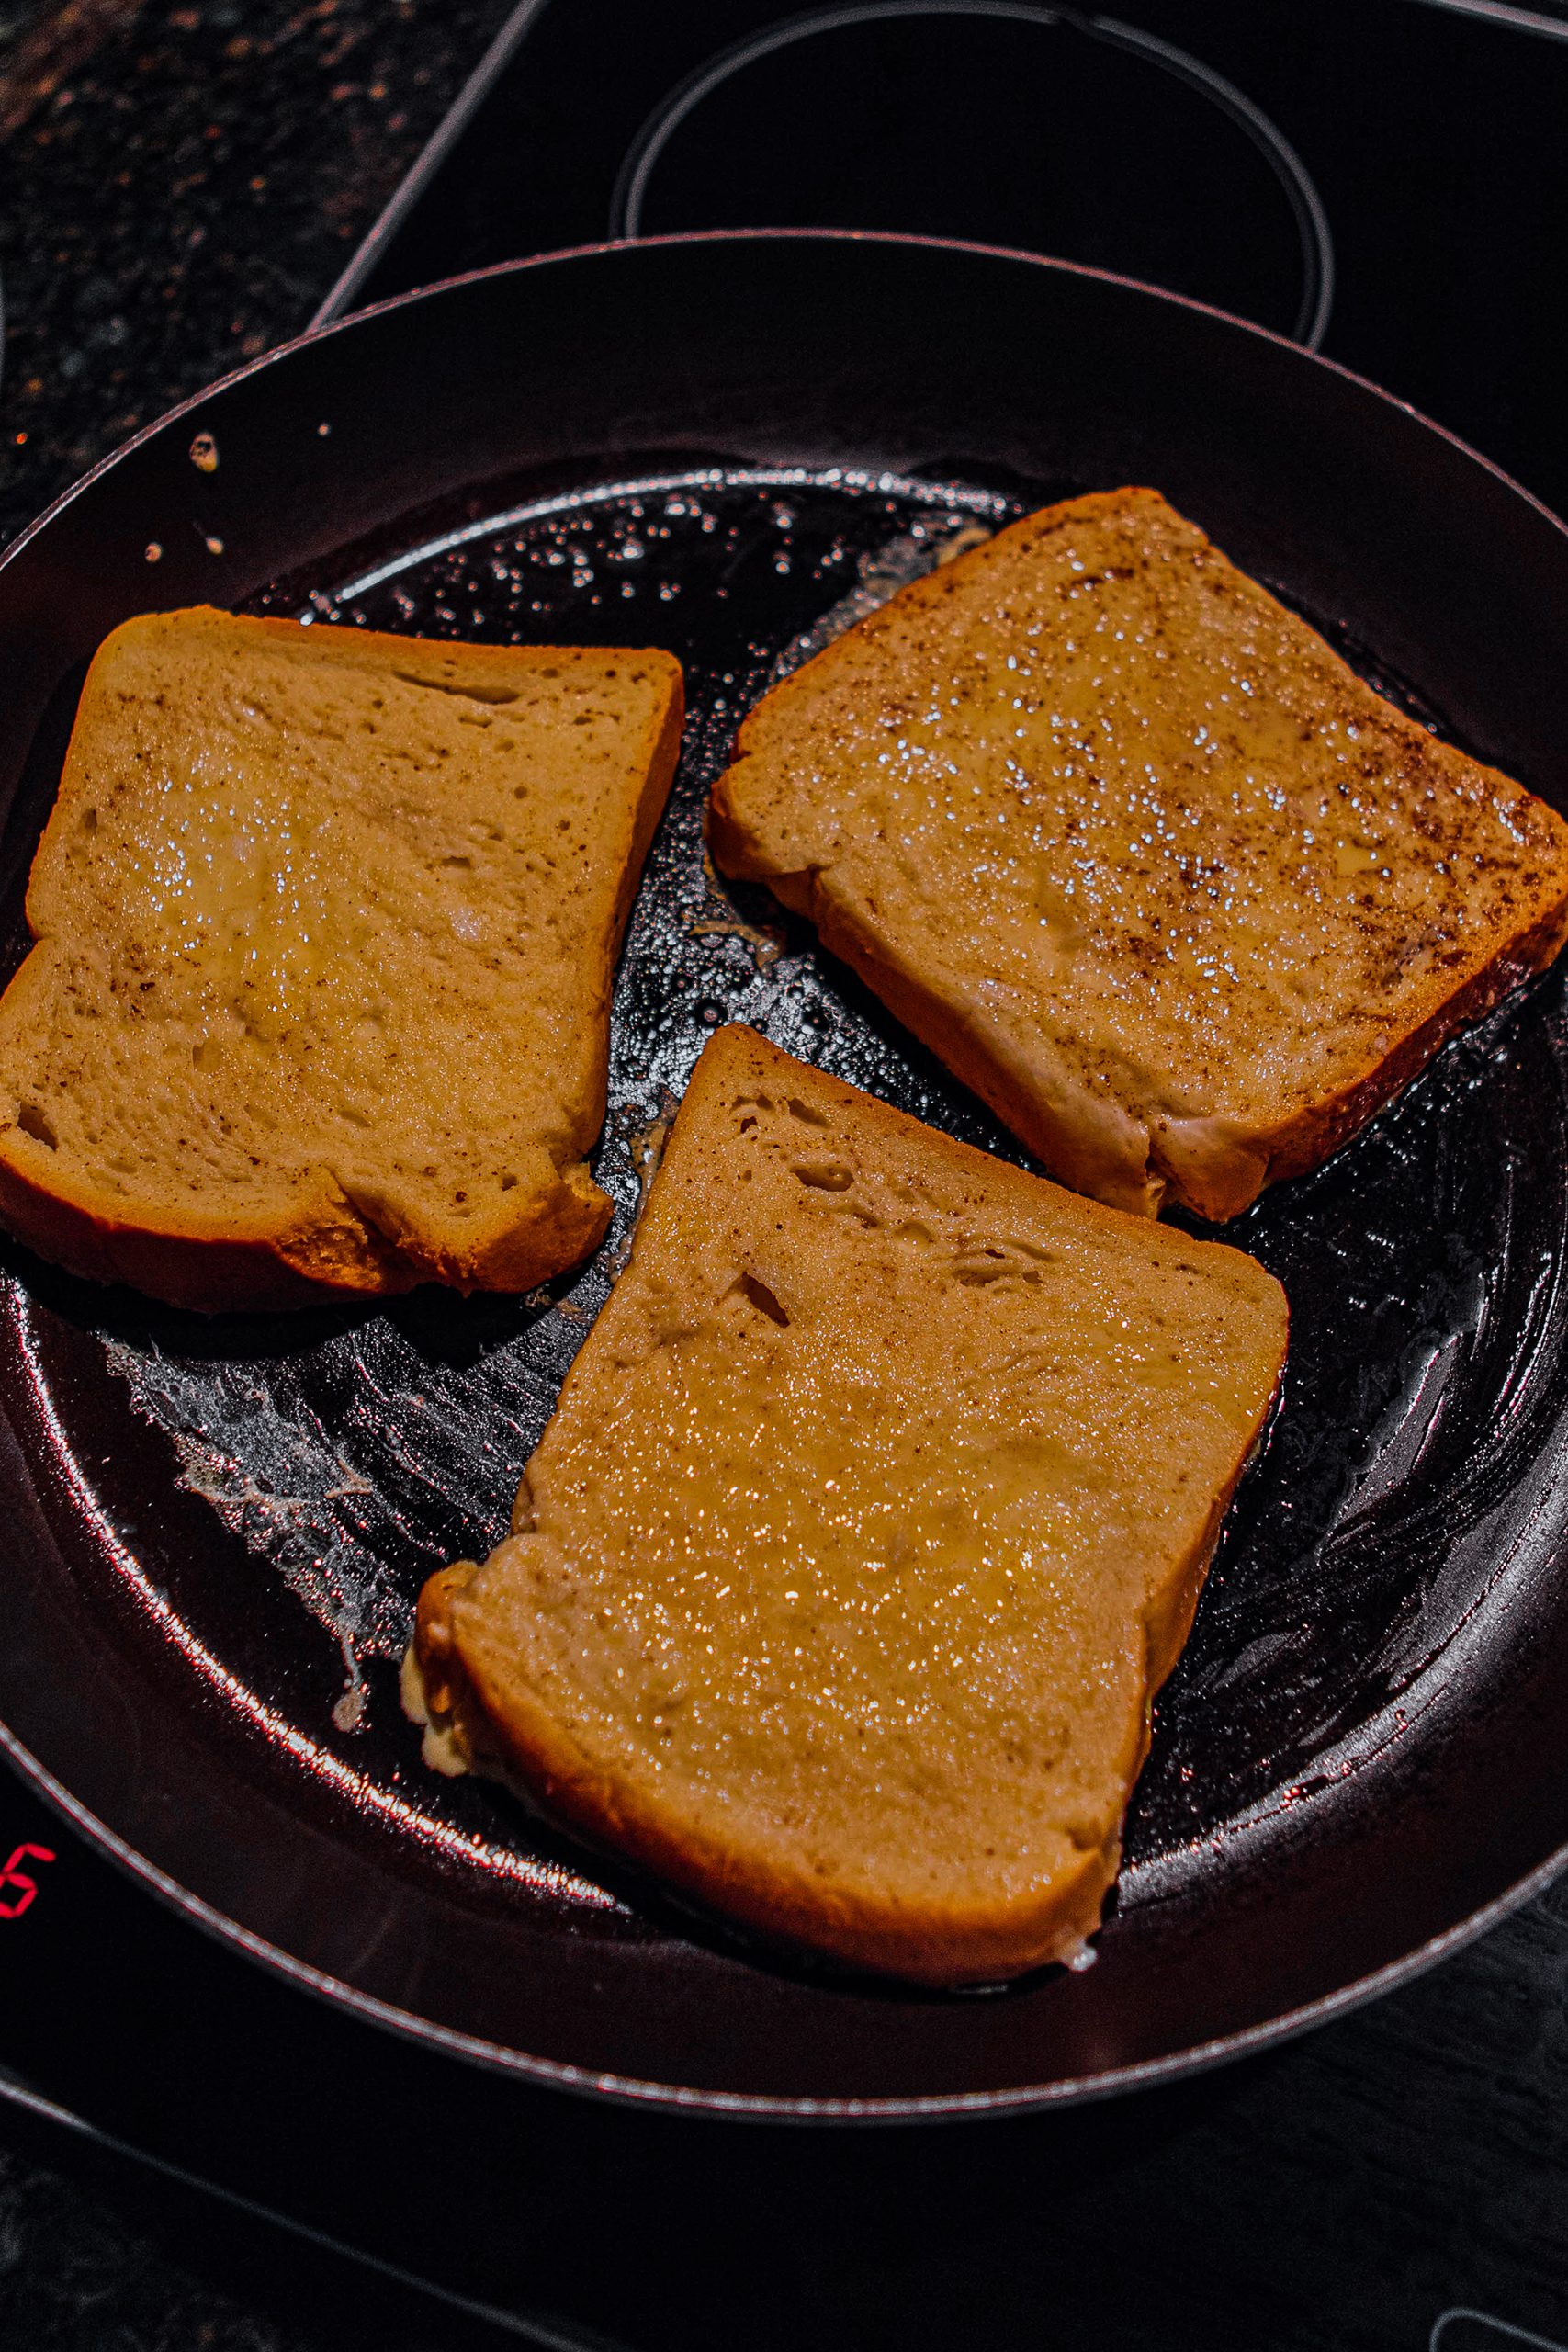 Place soaked bread onto pan, cooking on each side for a few minutes until golden.